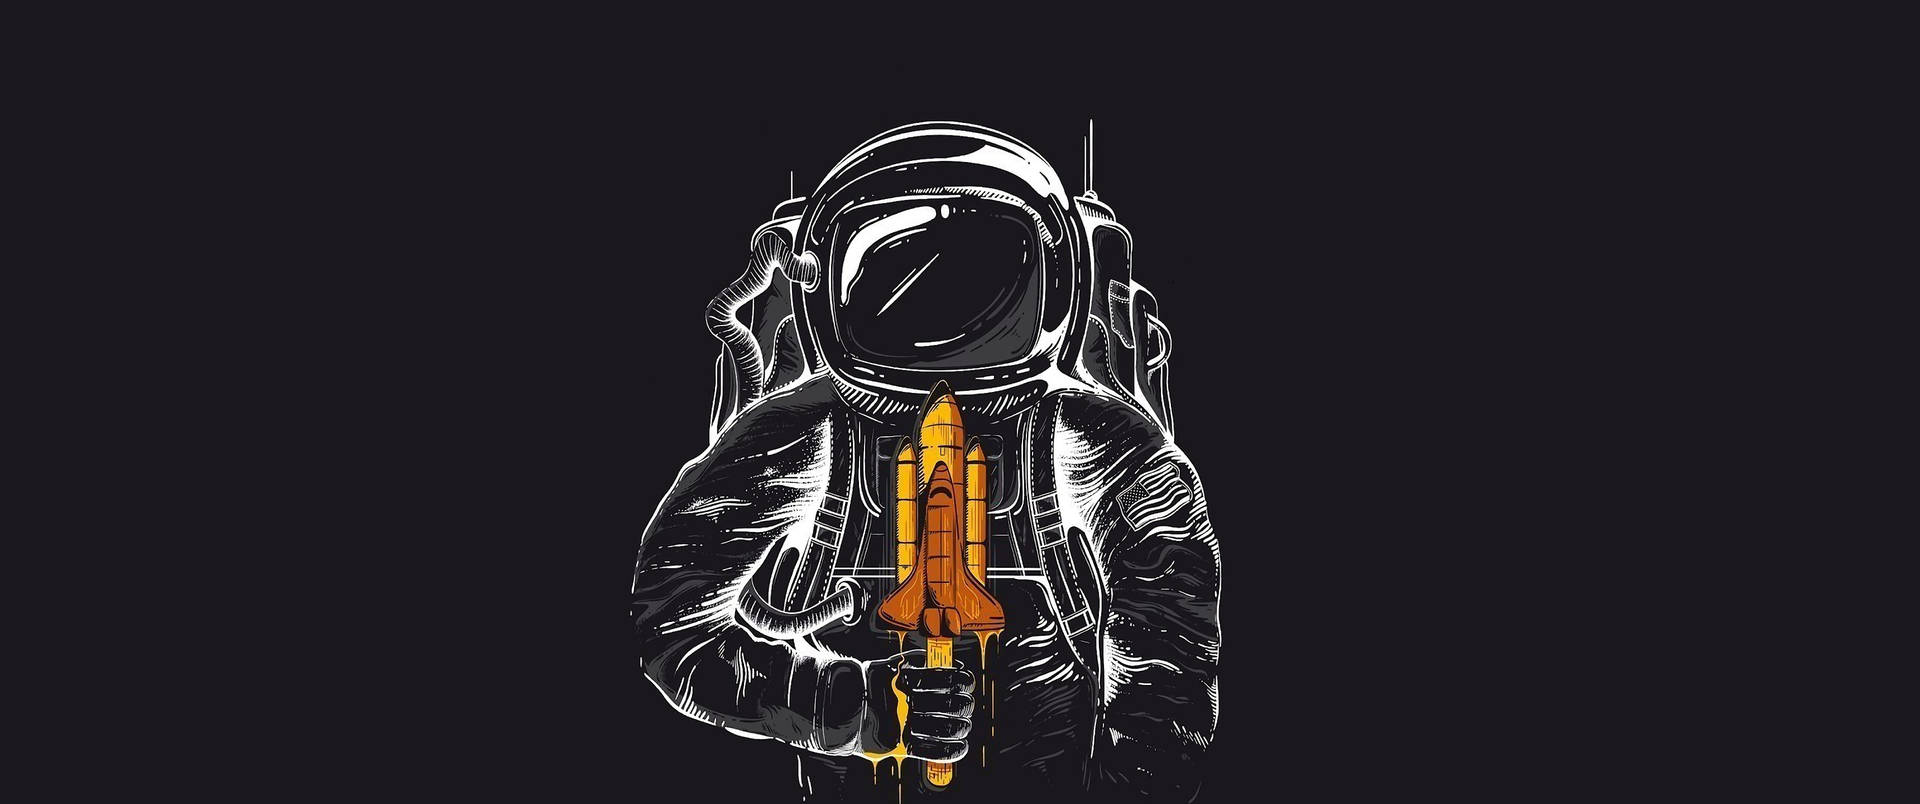 Space Aesthetic Astronaut And Space Shuttle Background